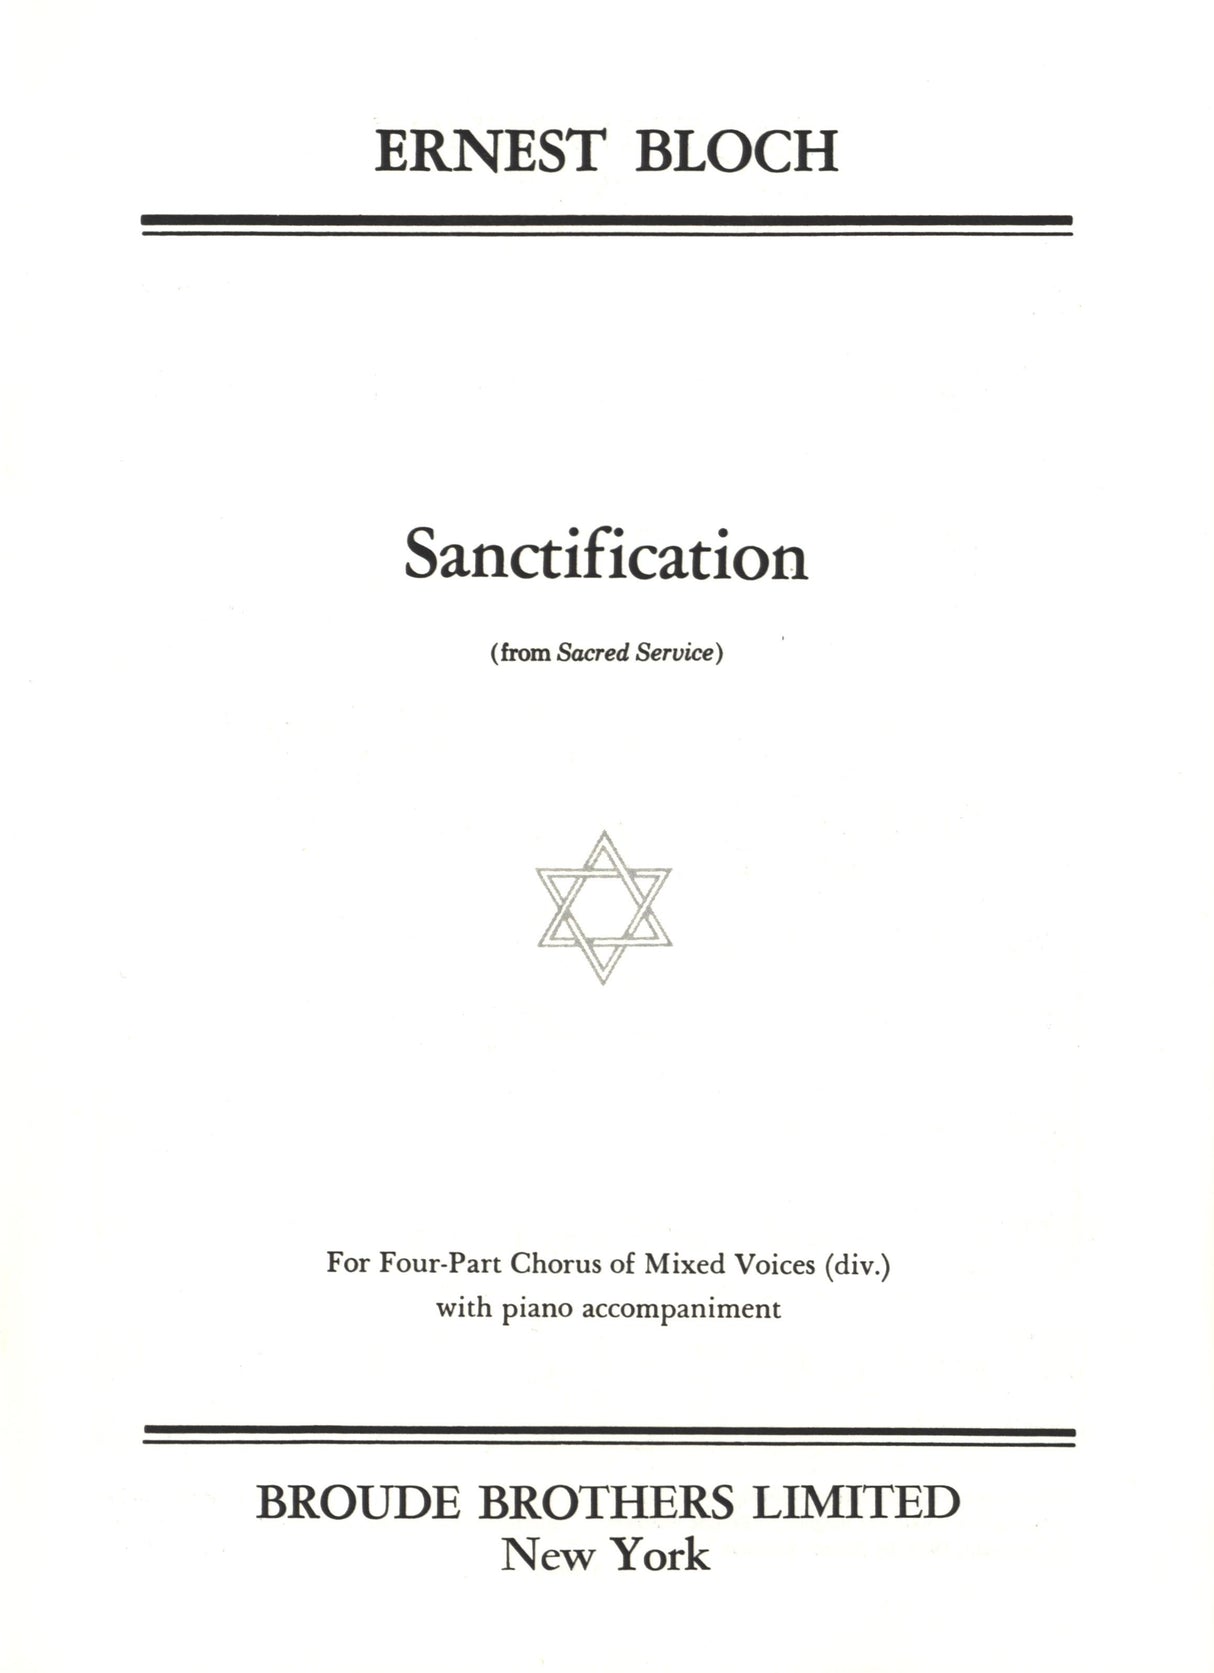 Bloch: Sanctification from Sacred Service